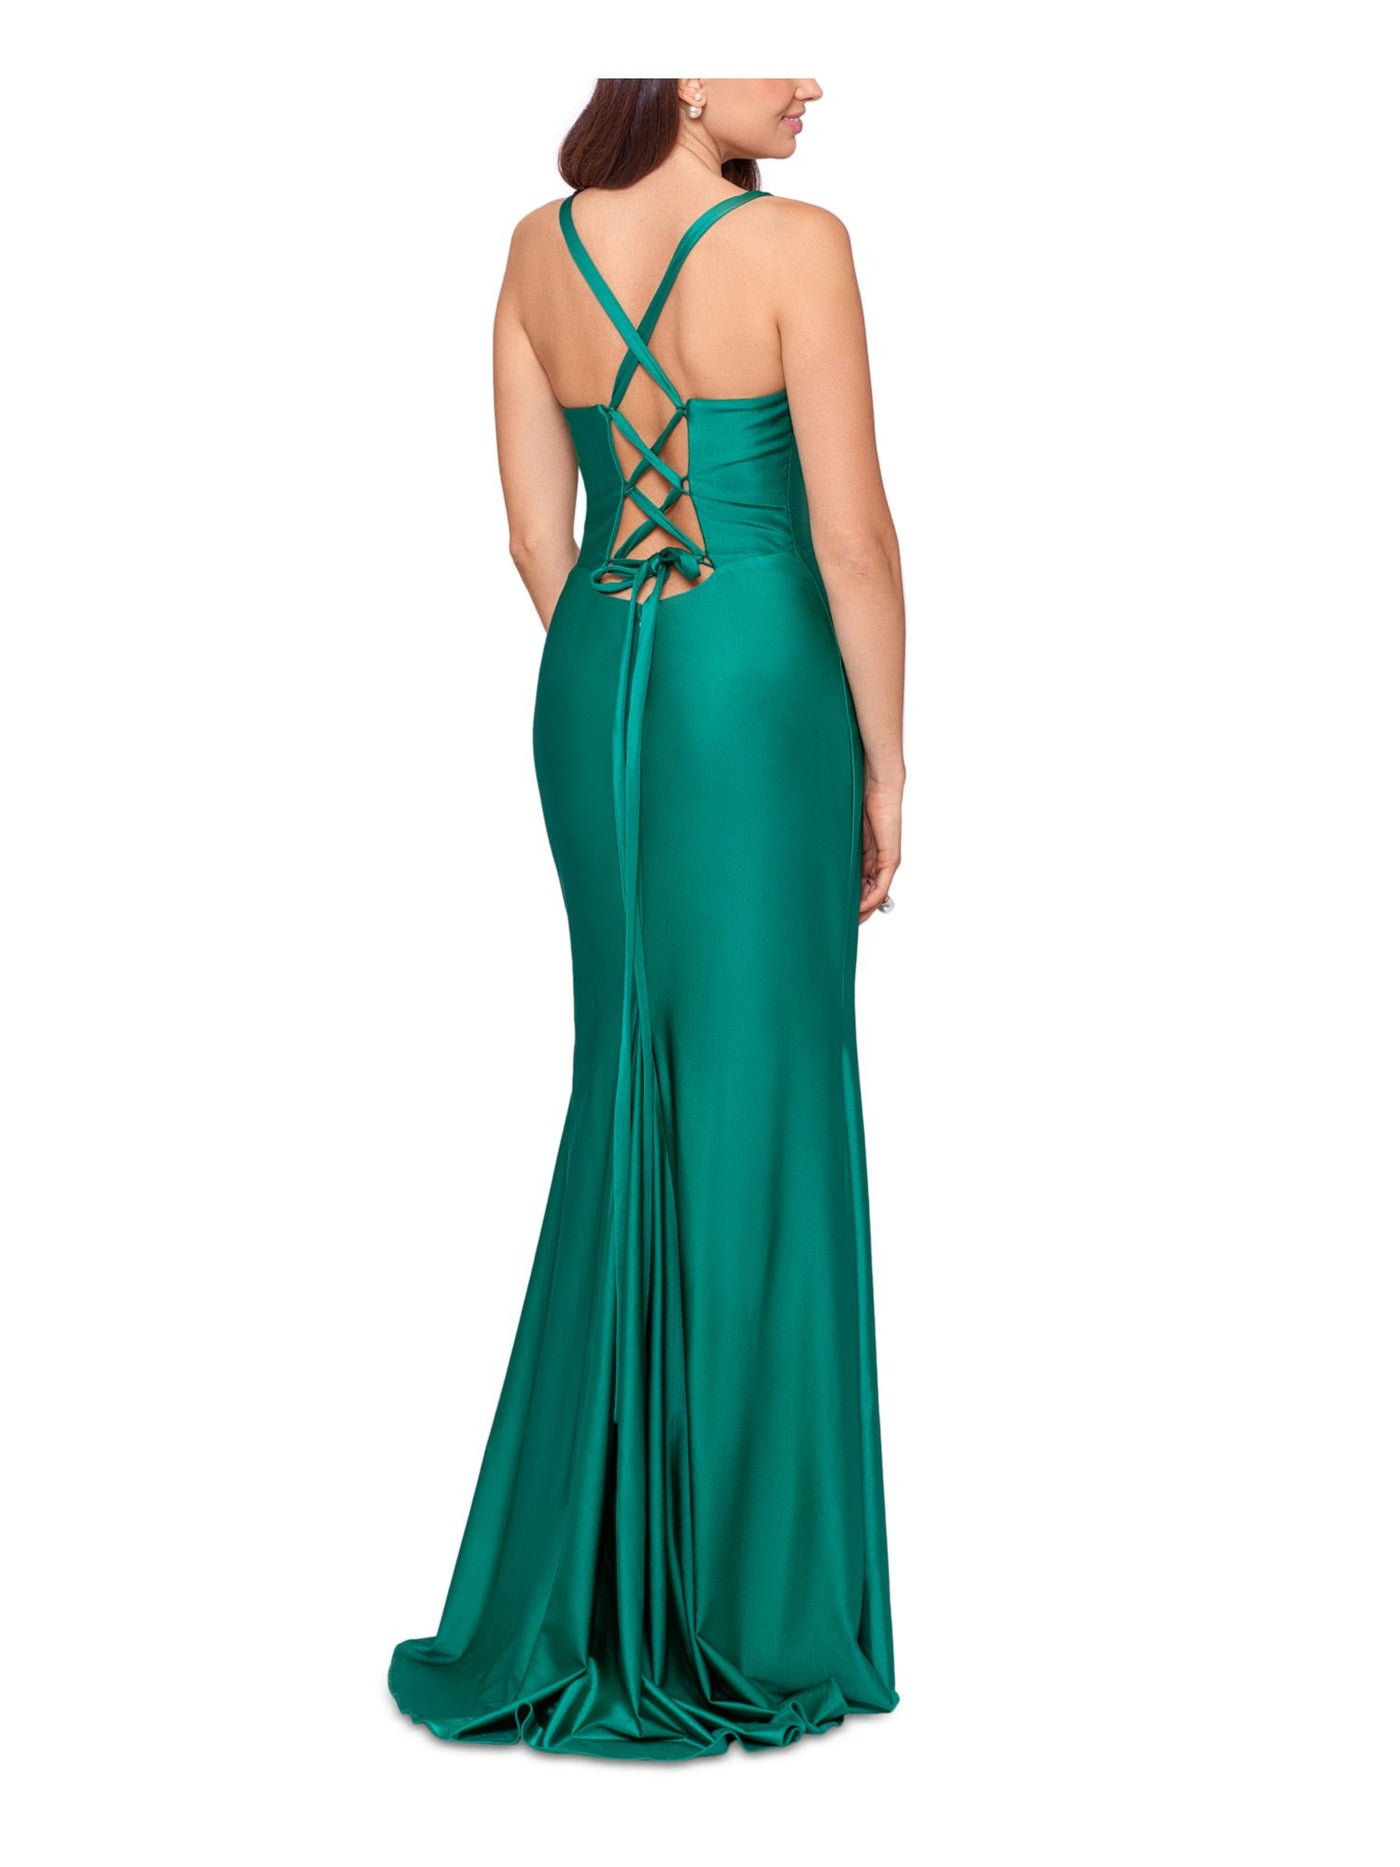 XSCAPE Womens Green Zippered Lined Lace-up Back Sleeveless Scoop Neck Full-Length Formal Gown Dress 2